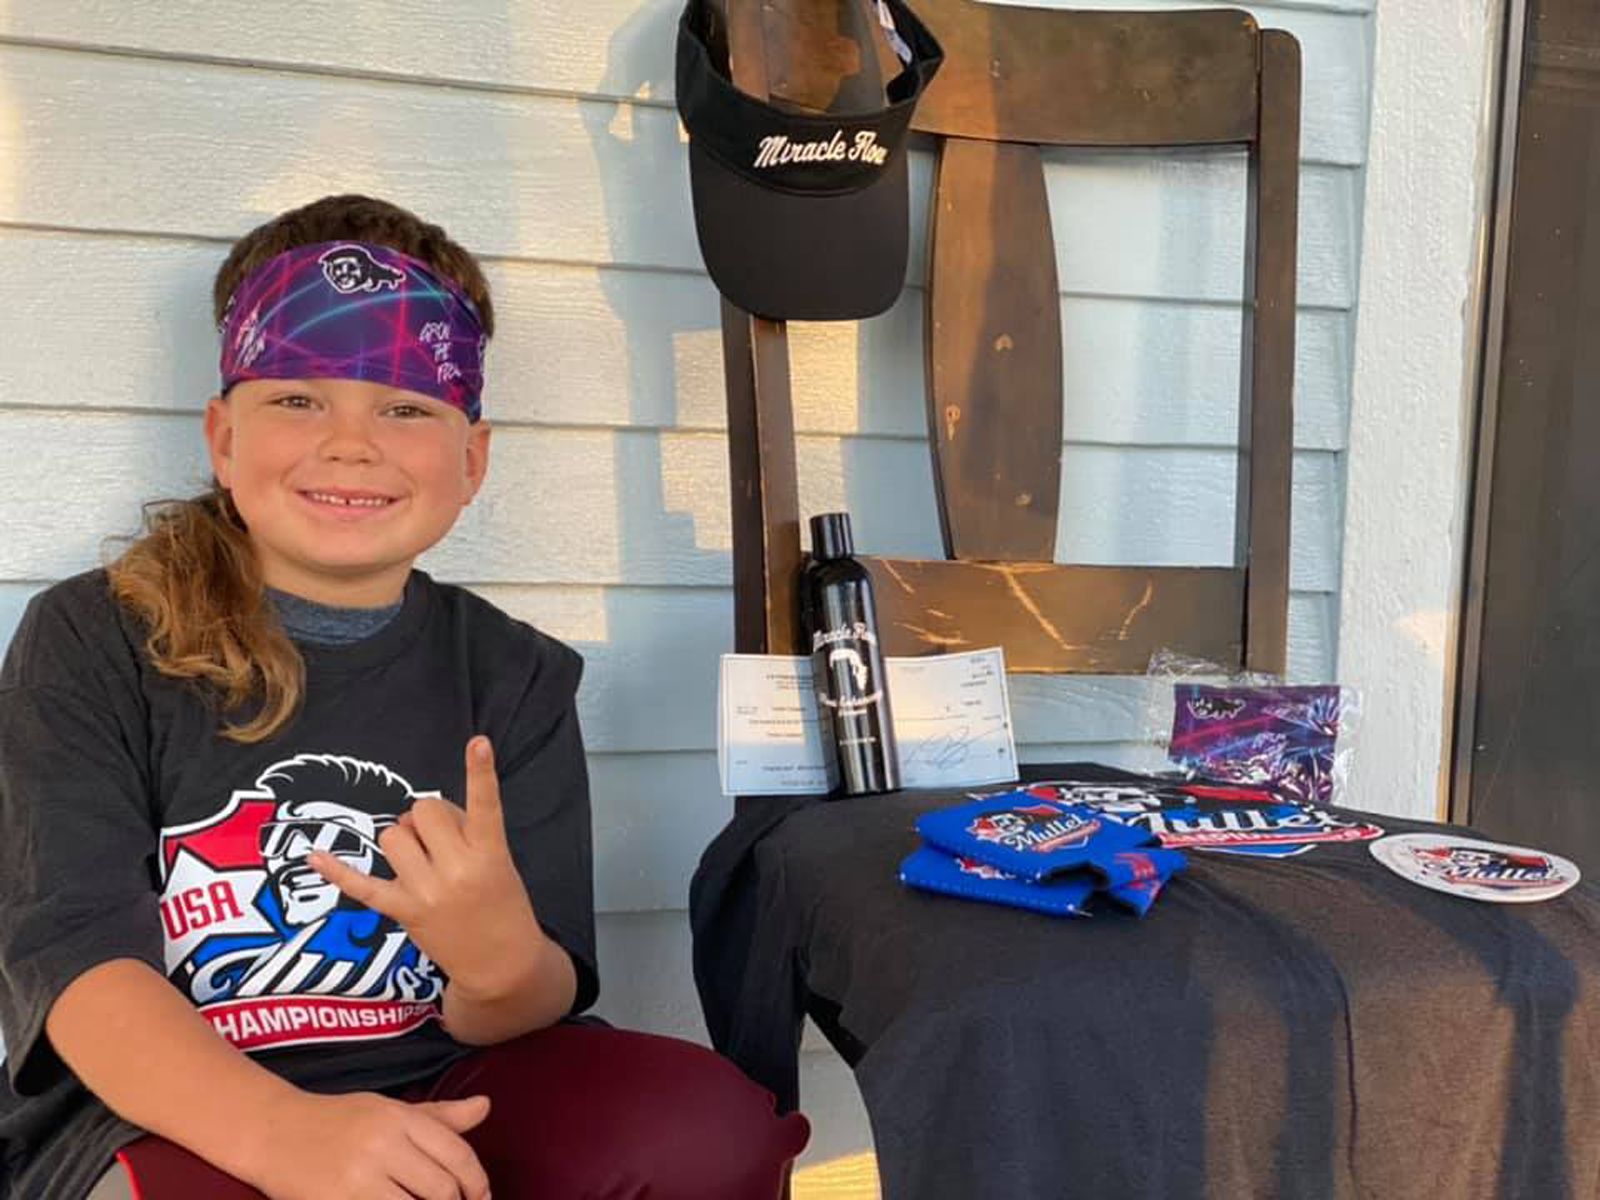 Texas boy wins first place in national mullet championship